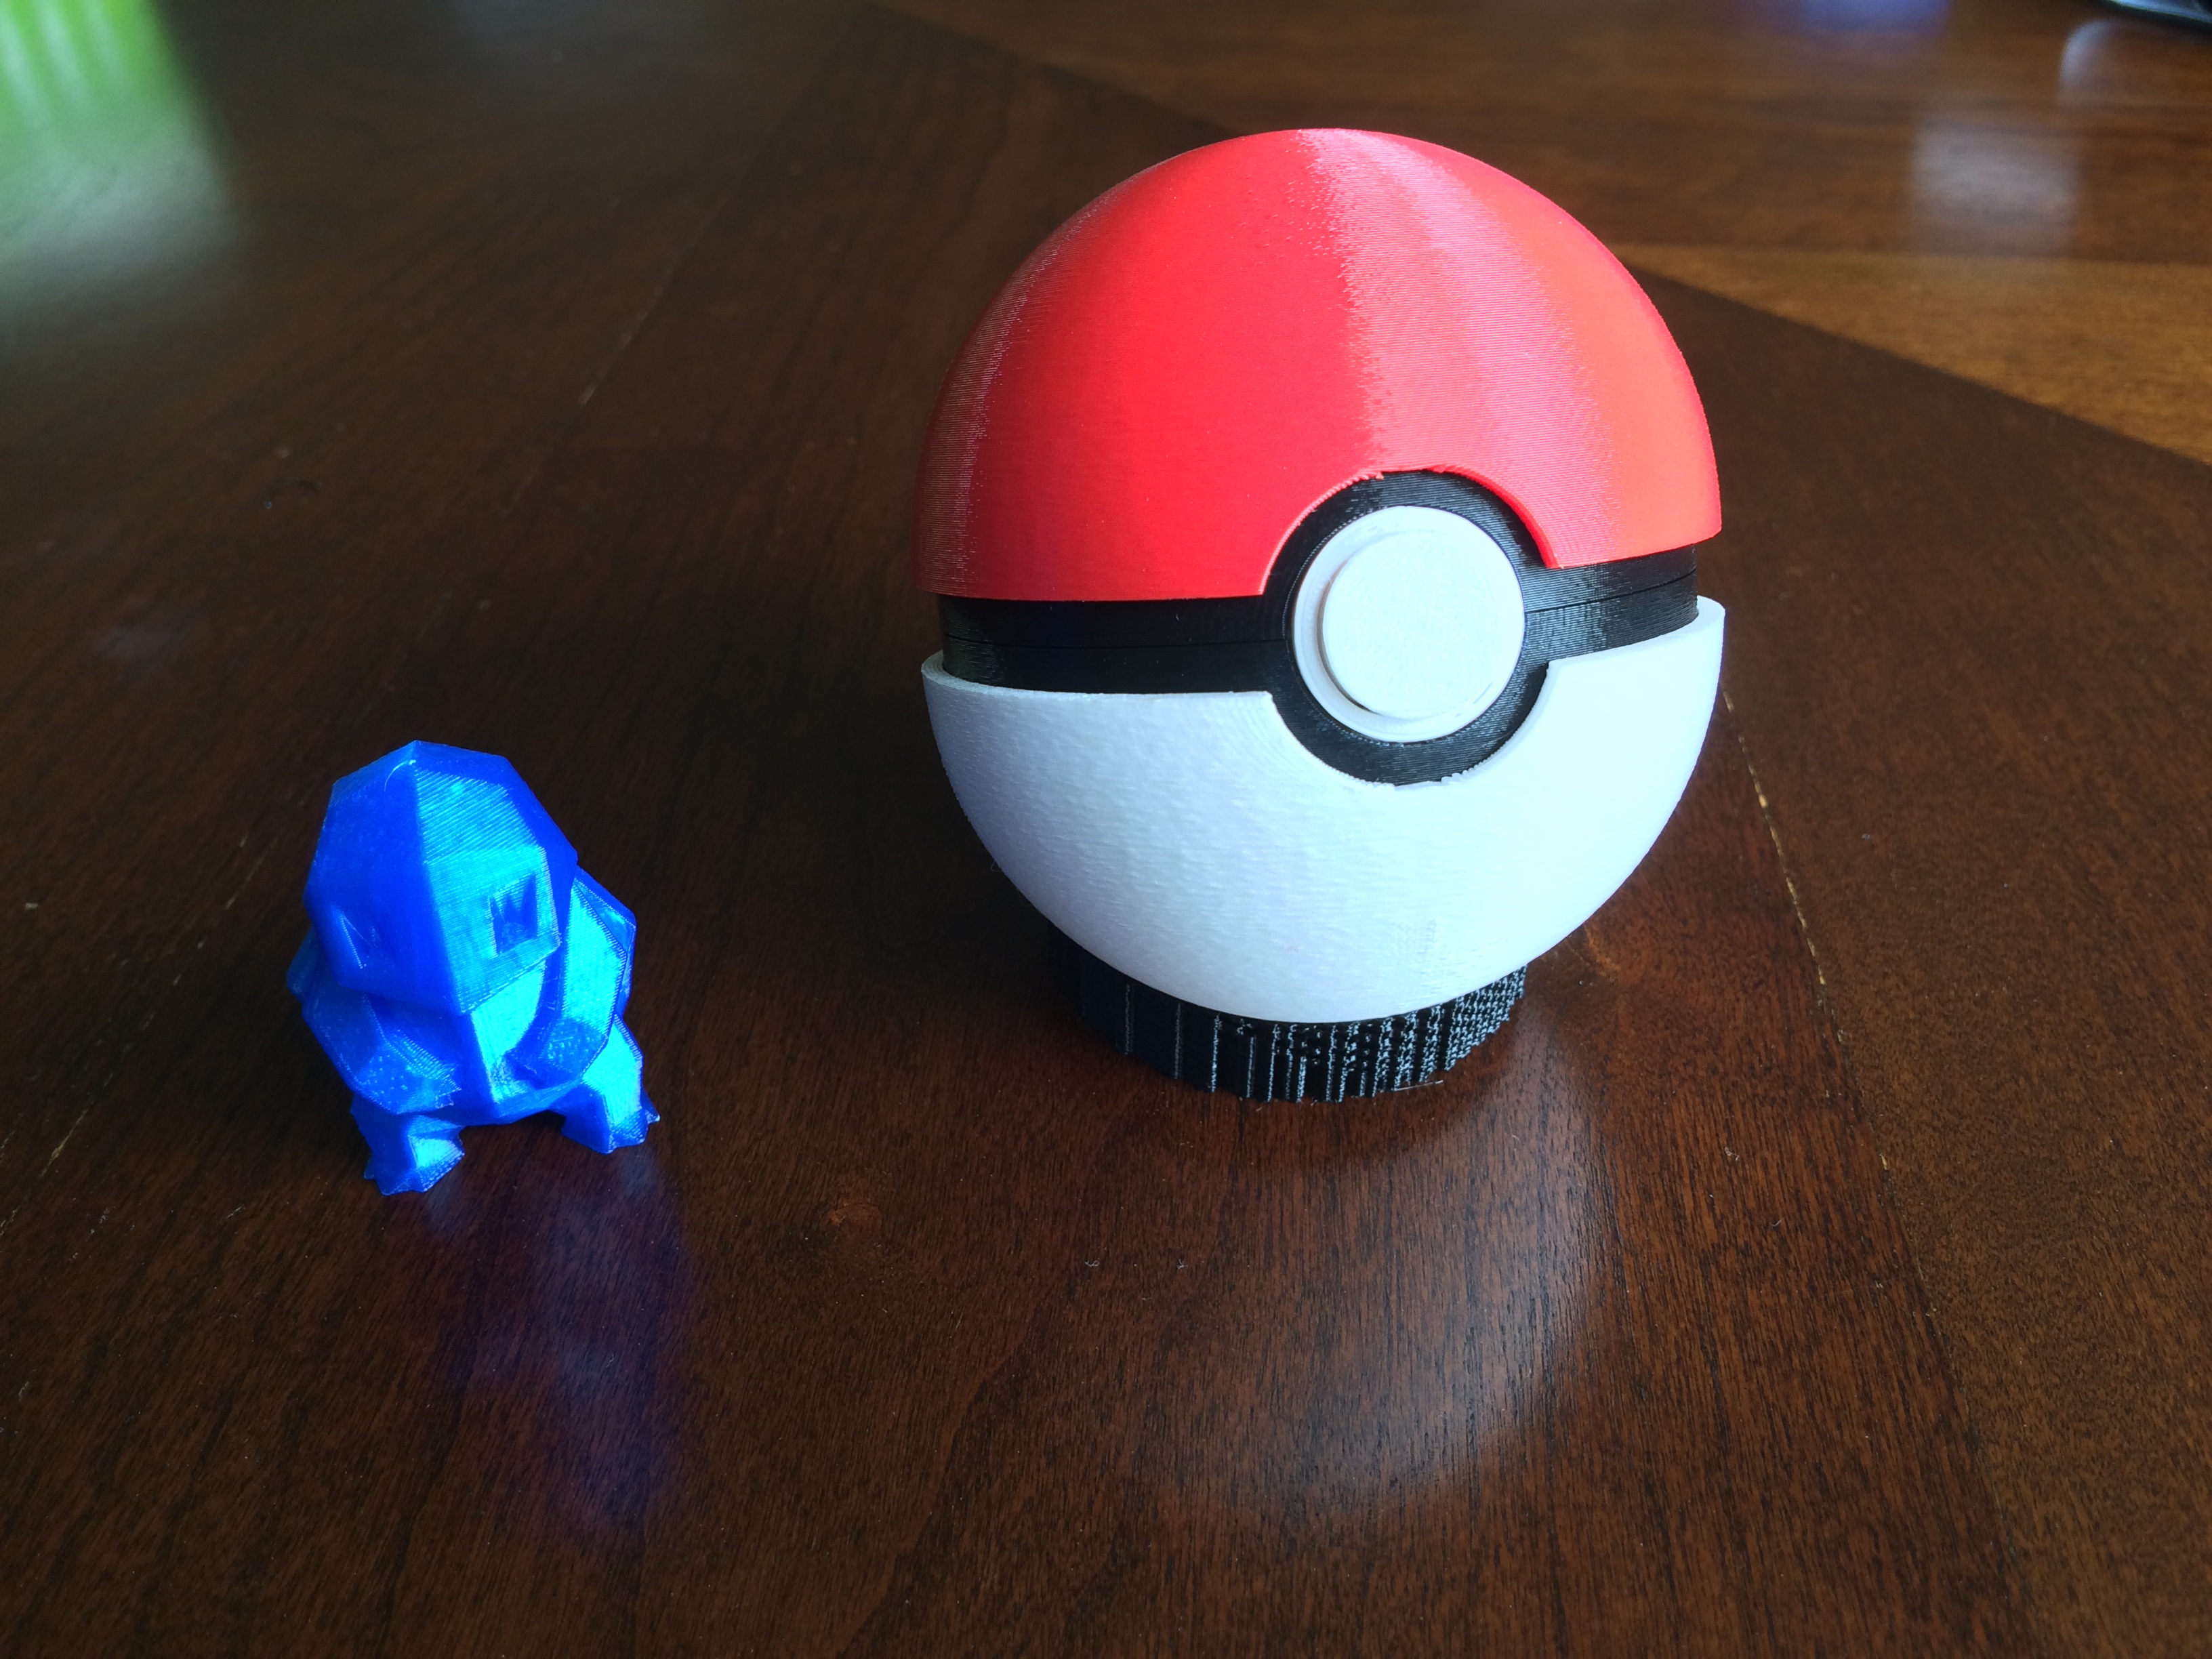 Pokeball (opens and closes)